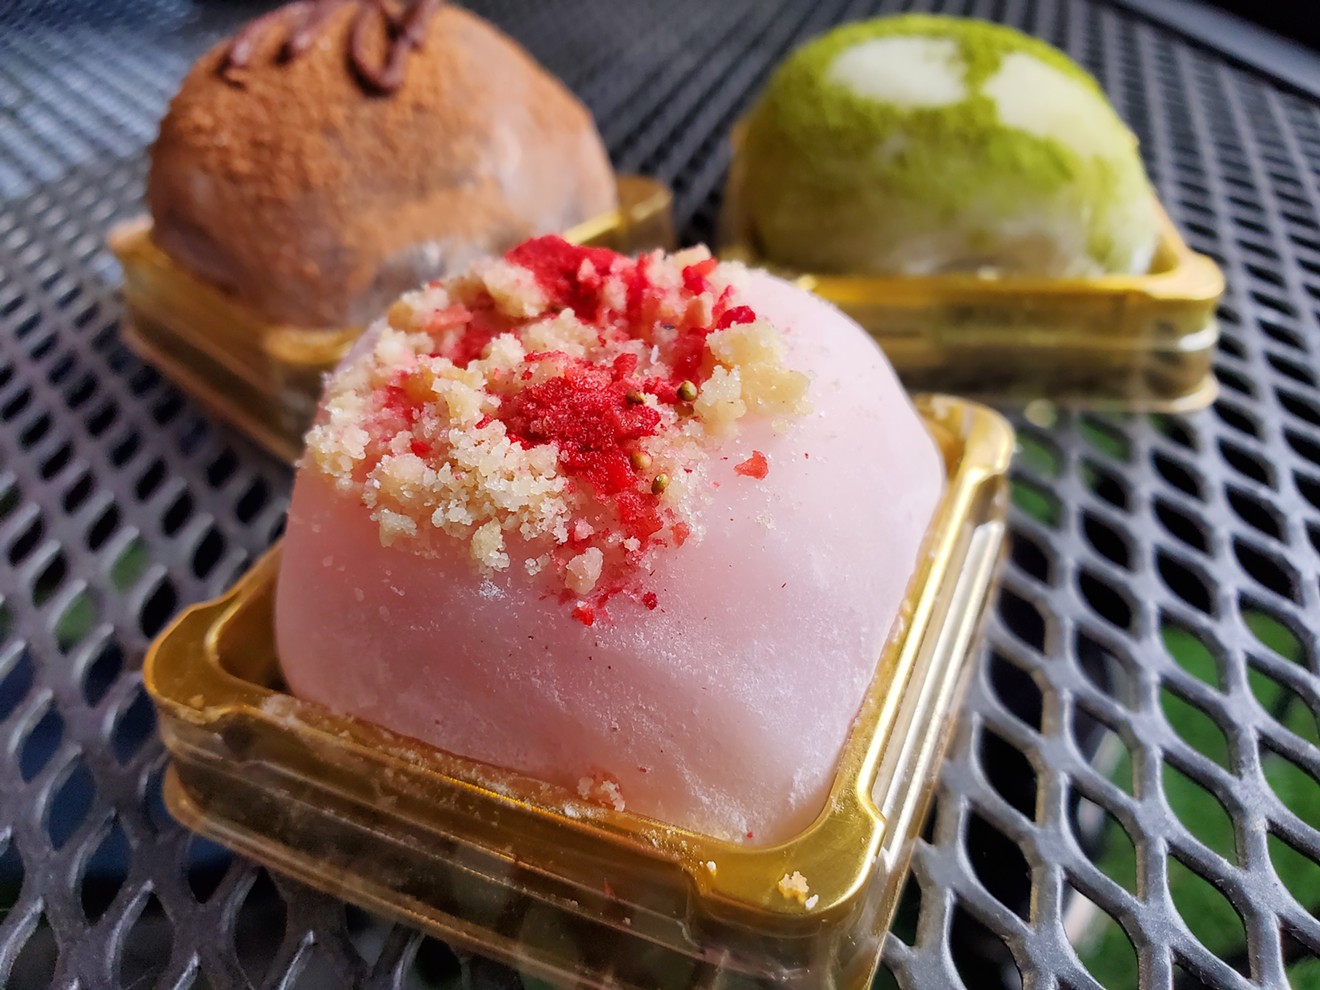 Madeline Dunhoff makes mochi using her grandmother's recipe as inspiration.